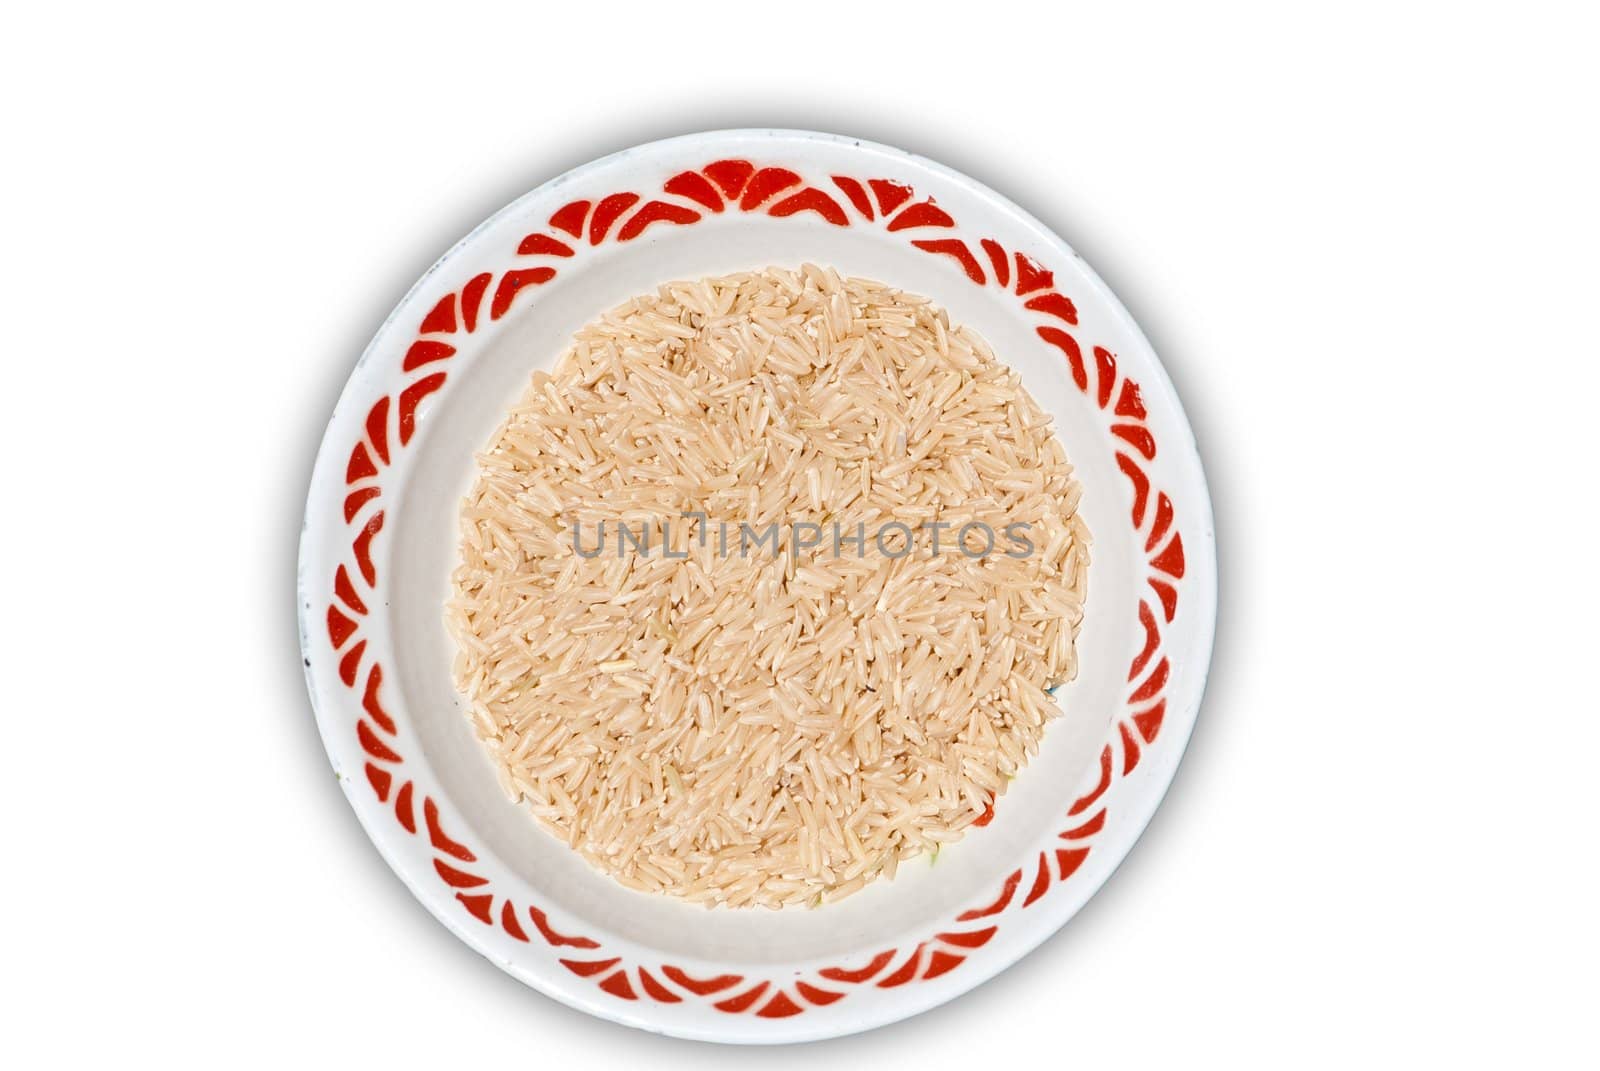 Brown rice in a bowl
 by sasilsolutions